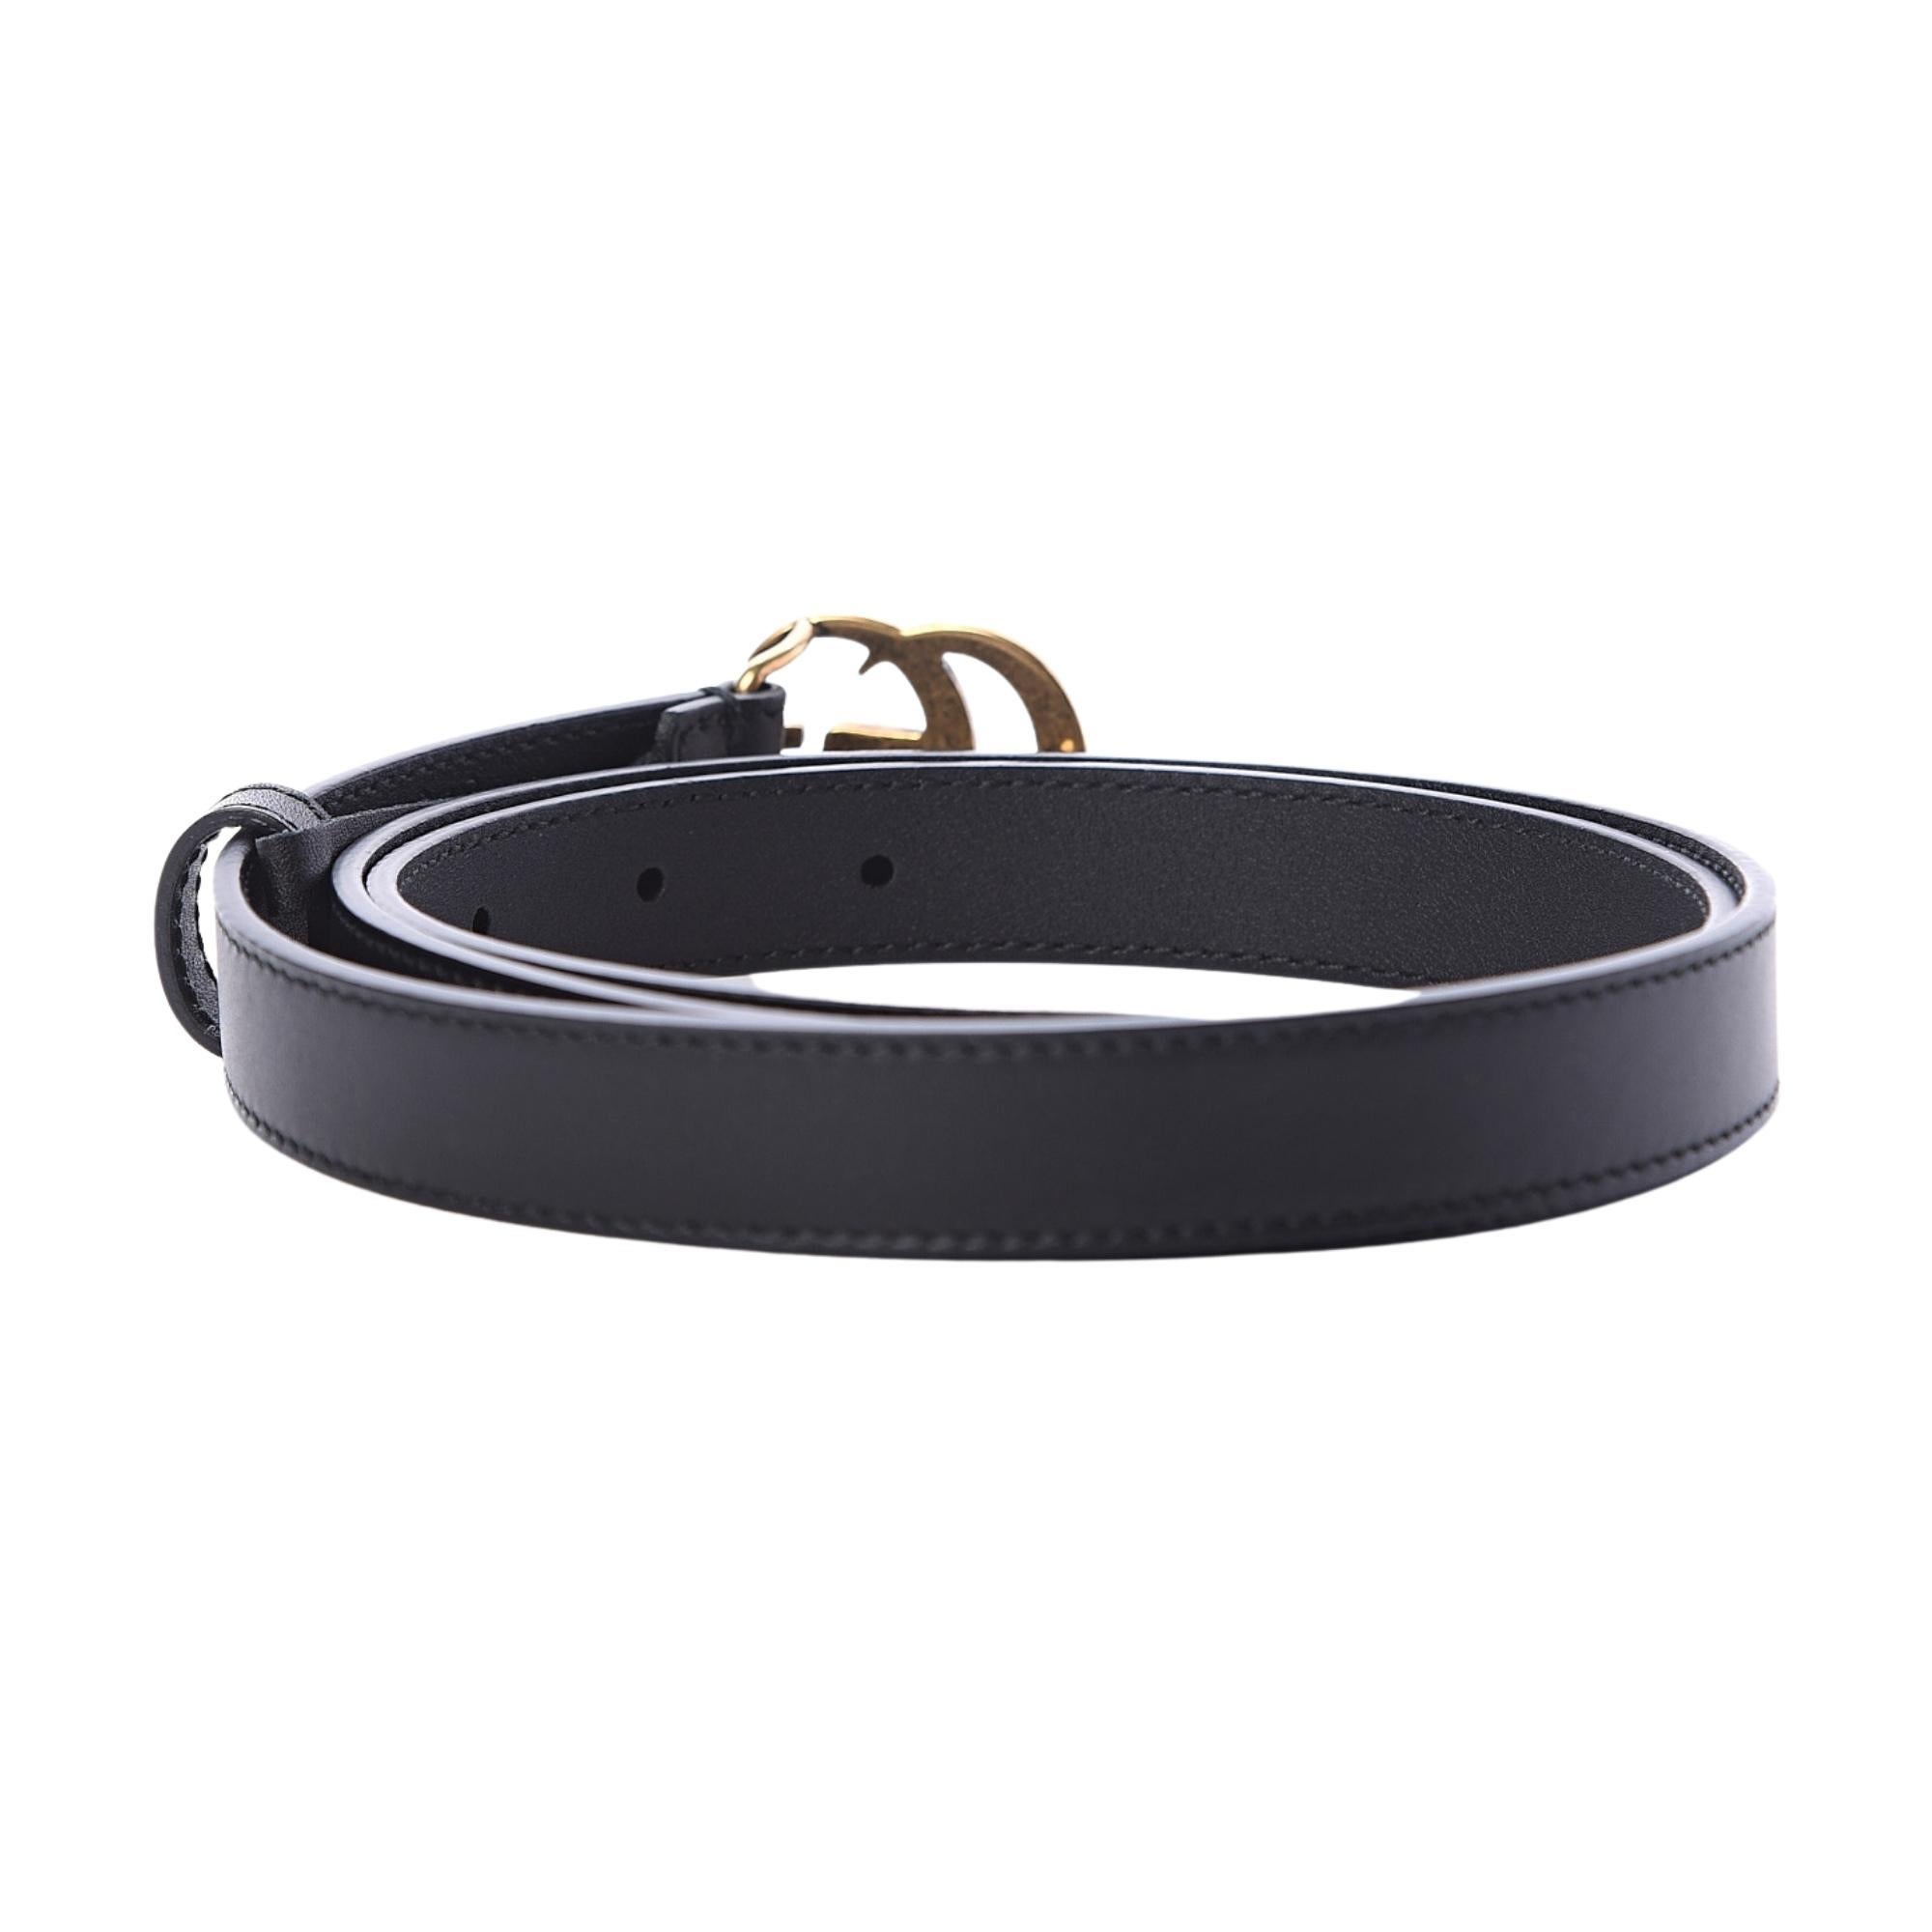 This belt is made of black calfskin leather and features the the signature GG buckle in aged gold tone.

COLOR: Black
MATERIAL: Calf leather
ITEM CODE: 409417
SIZE: 90 cm / 36 in
COMES WITH: Dust bag and box
CONDITION: New

Made in Italy